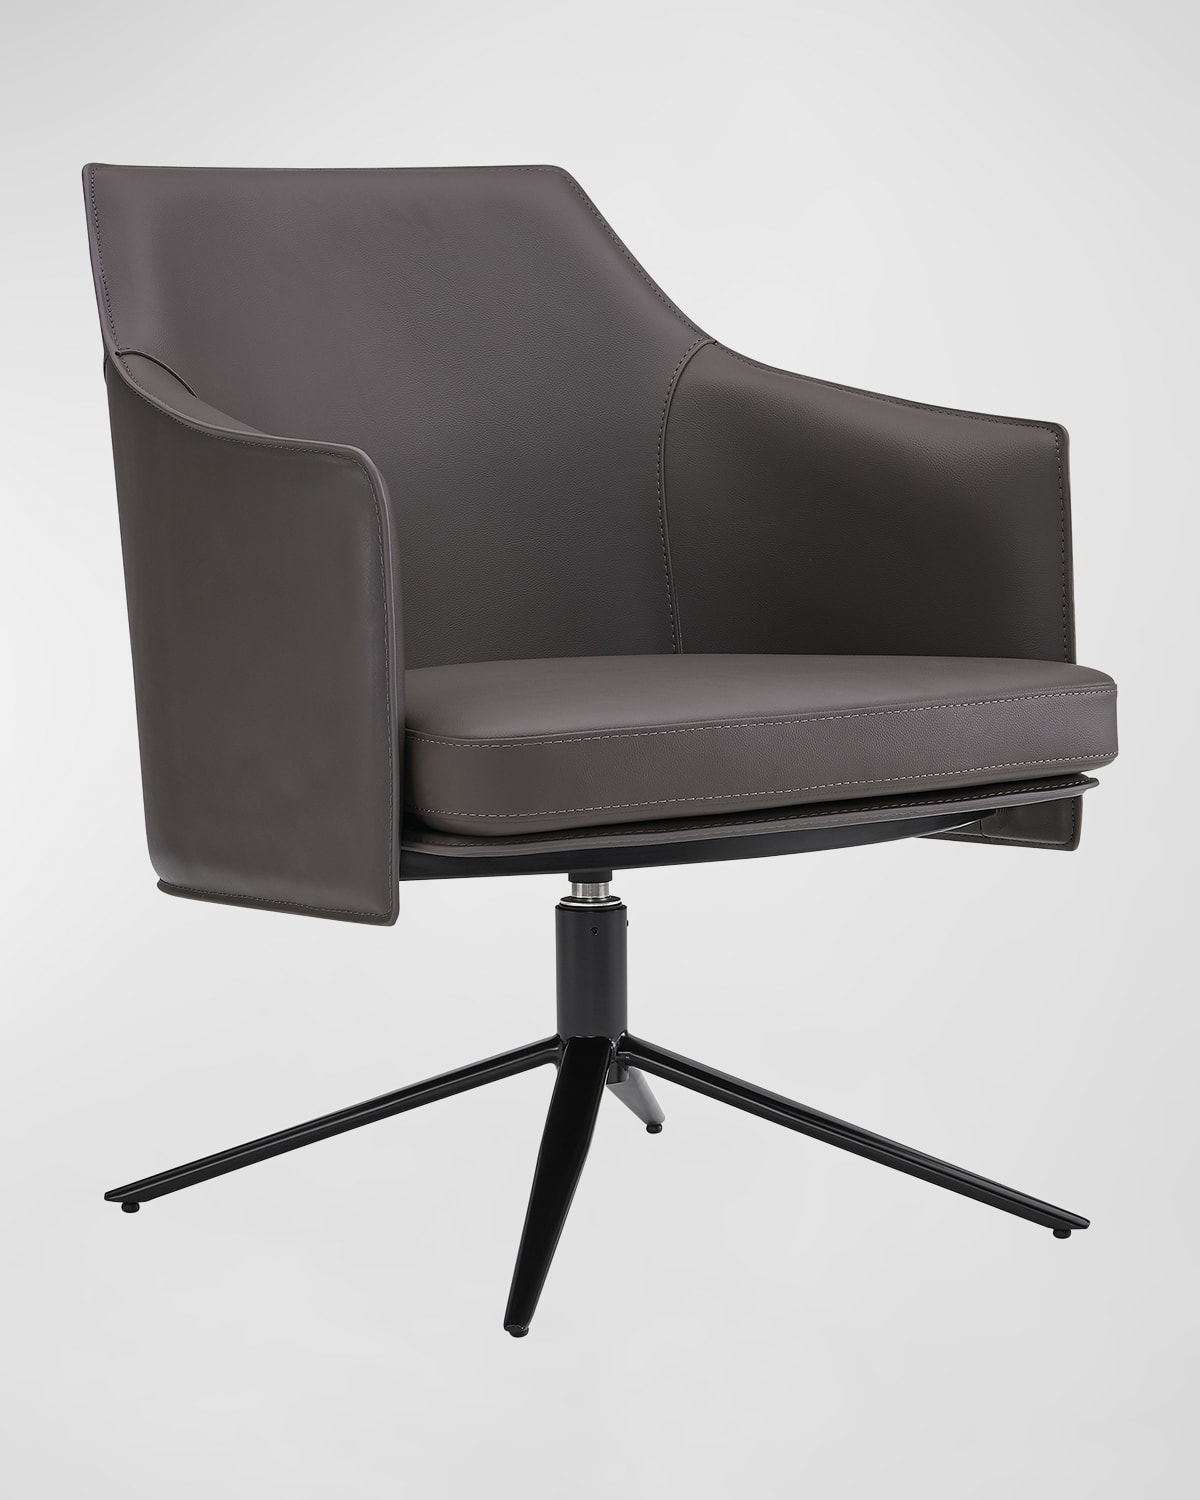 Euro Style Signa Lounge Chair In Dark Gray